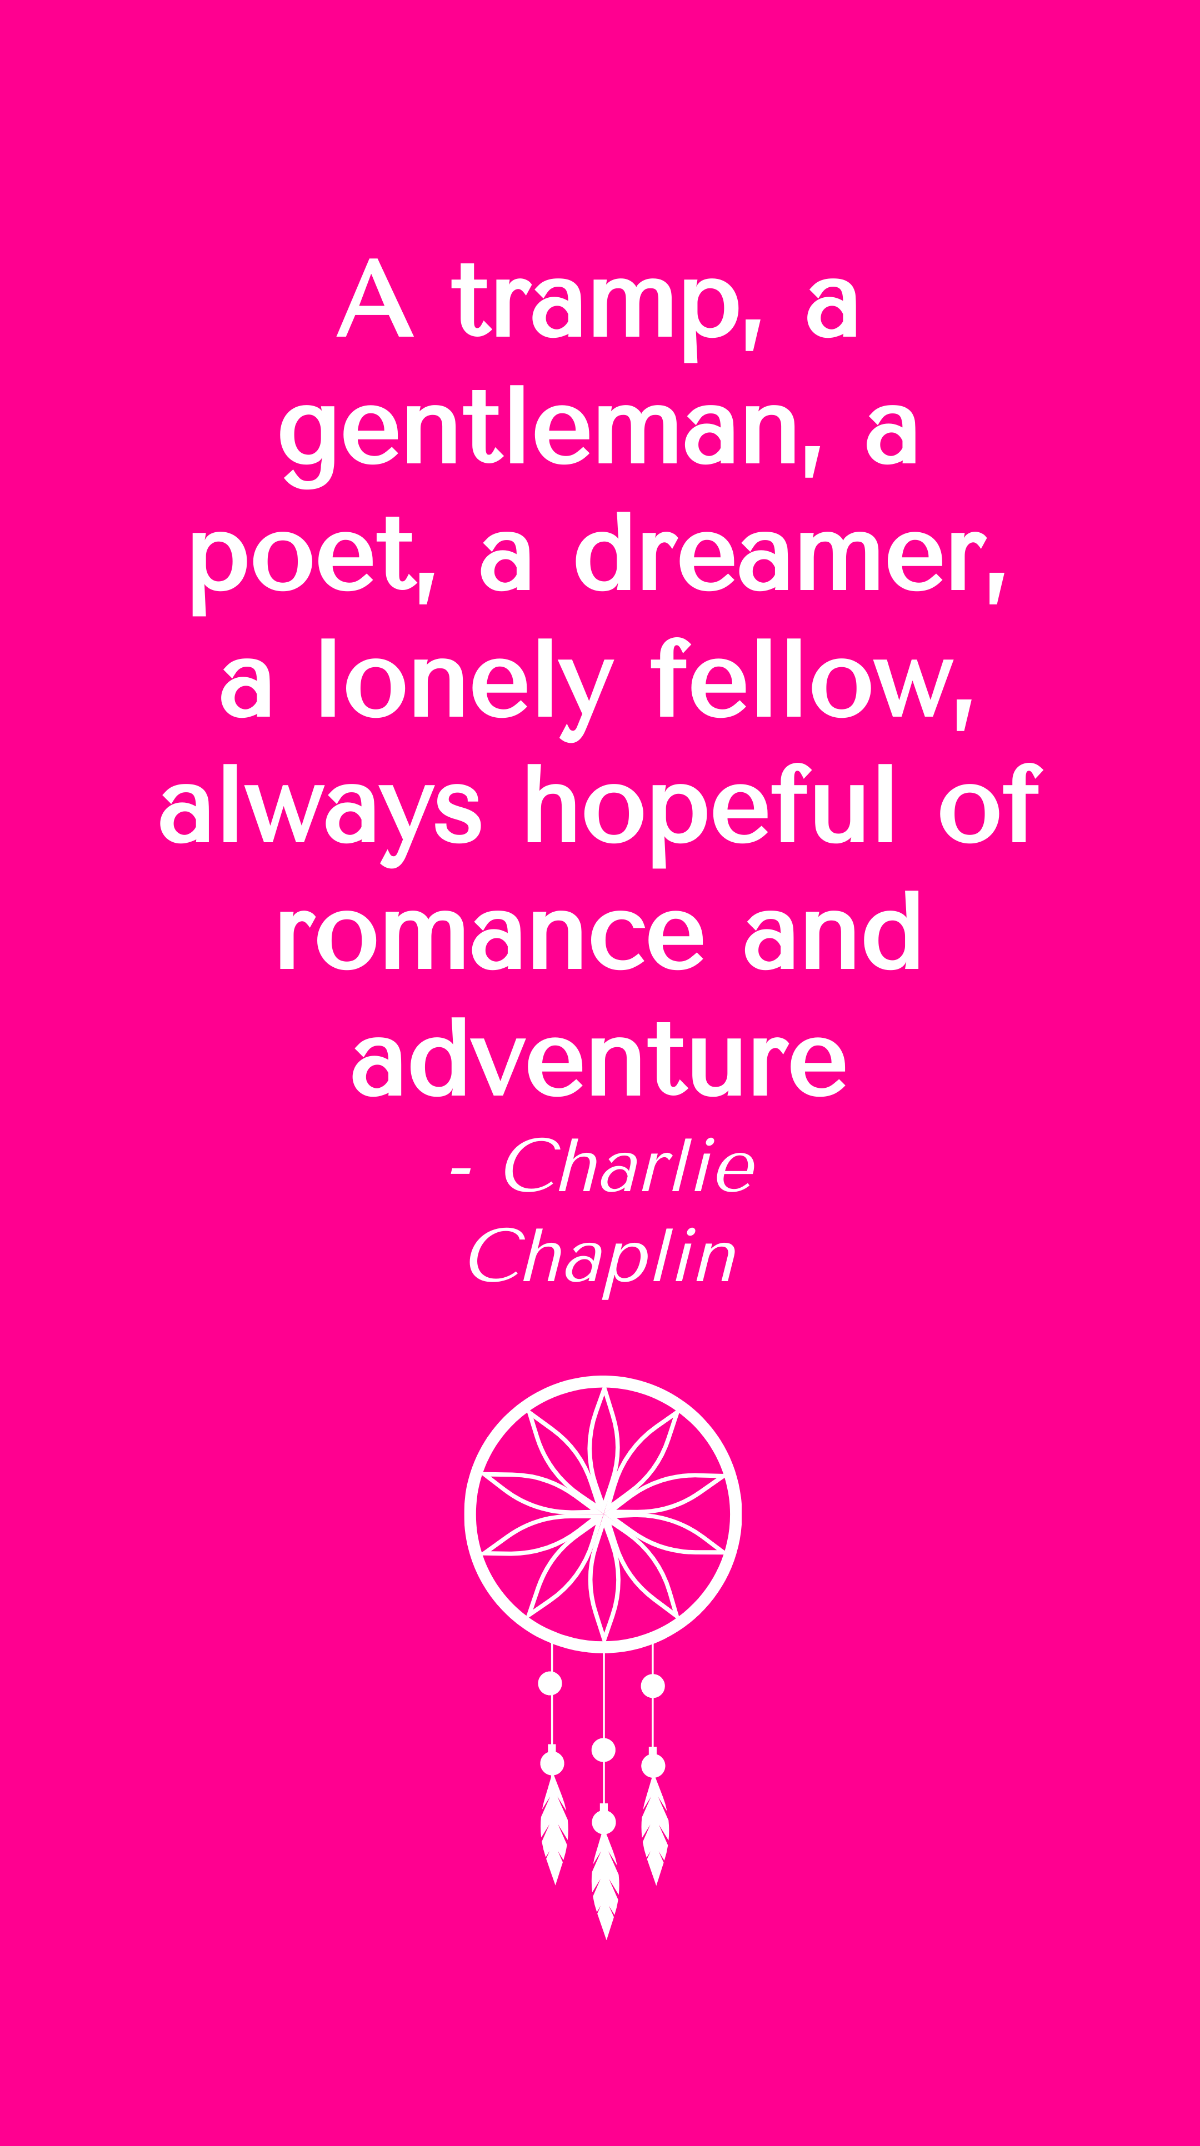 Charlie Chaplin - A tramp, a gentleman, a poet, a dreamer, a lonely fellow, always hopeful of romance and adventure Template